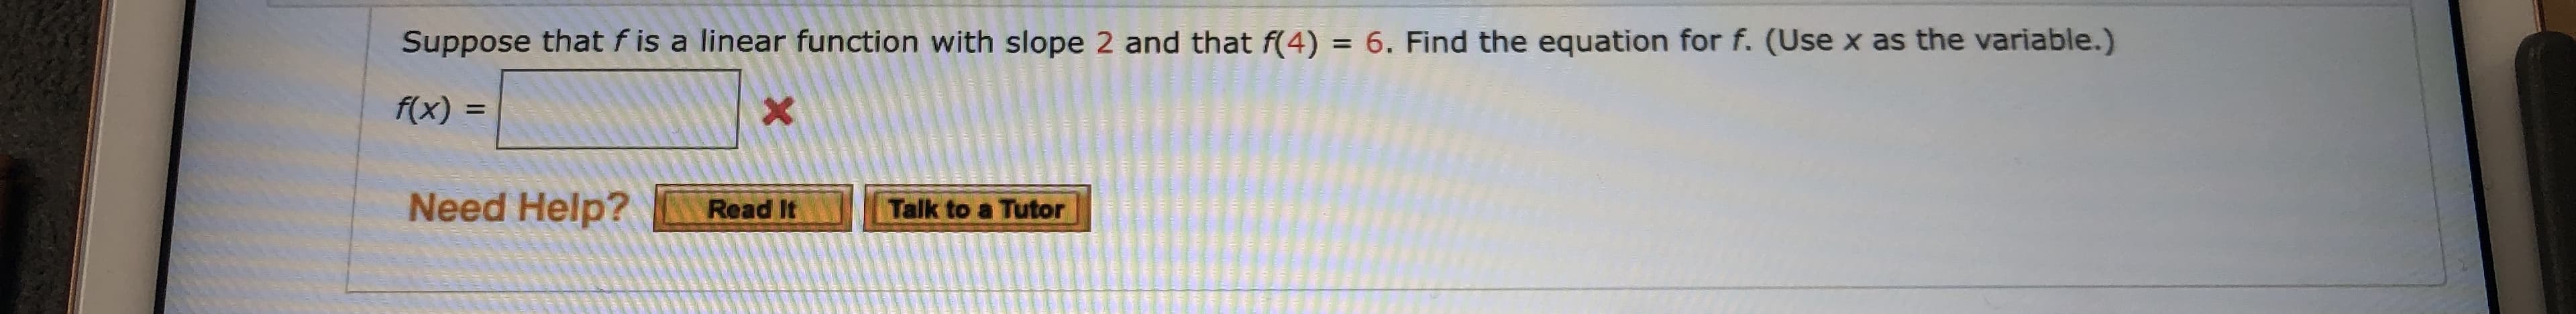 Suppose that f is a linear function with slope 2 and that f(4) = 6. Find the equation for f. (Use x as the variable.)
Xx
f(x) =
Need Help?
Read It
Talk to a Tutor
